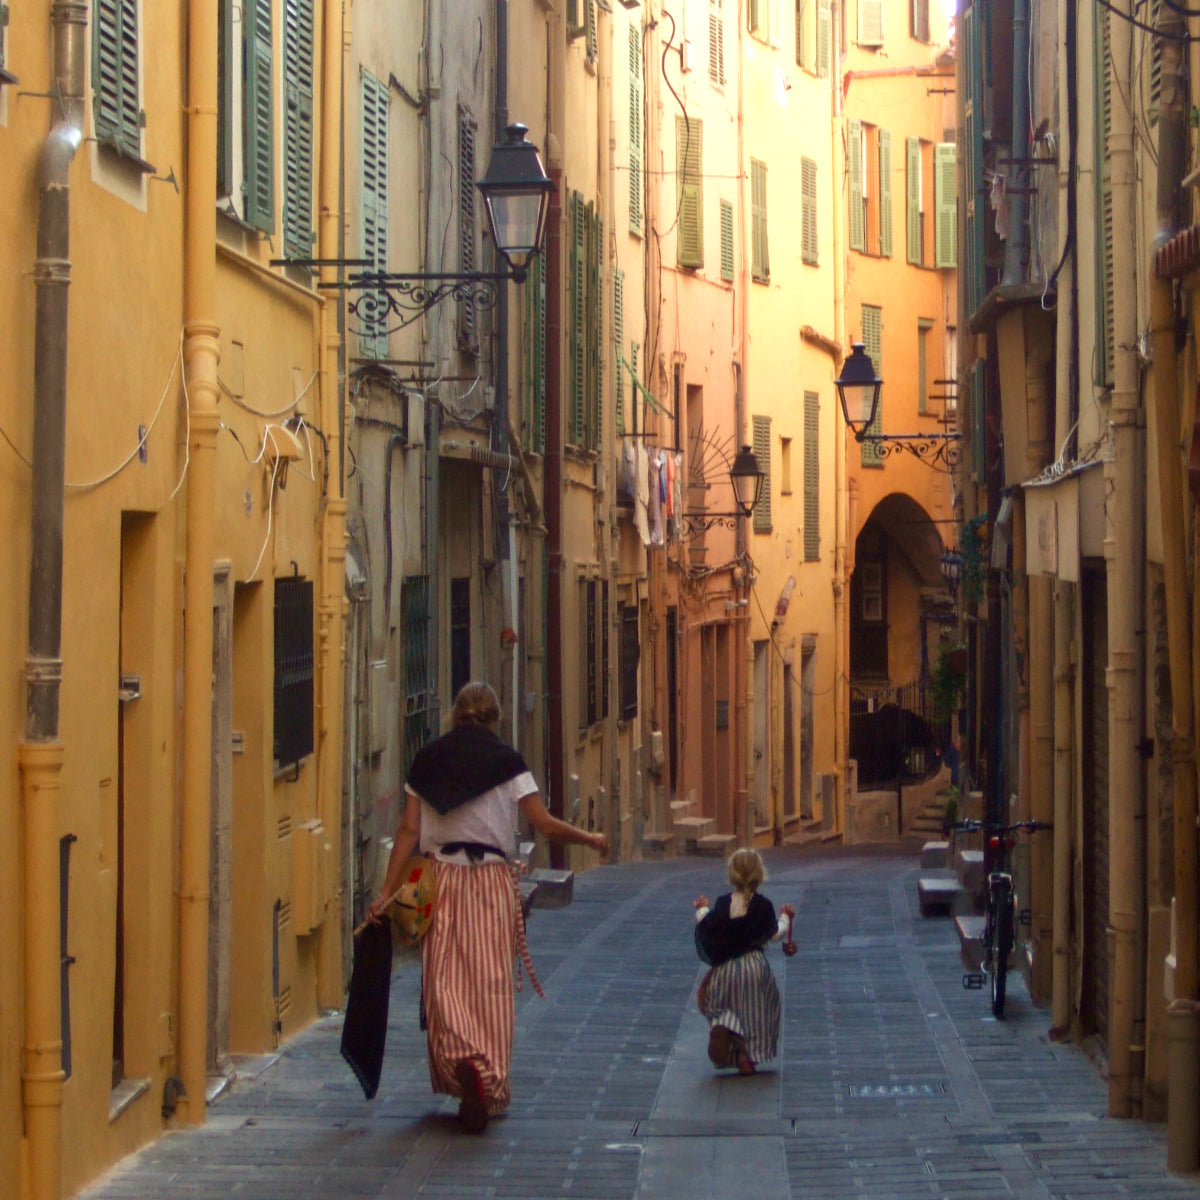 Joanne Short with her youngest daughter Wilamena walking through the Old Town of Menton dressed in traditional Mentonnaise clothes.